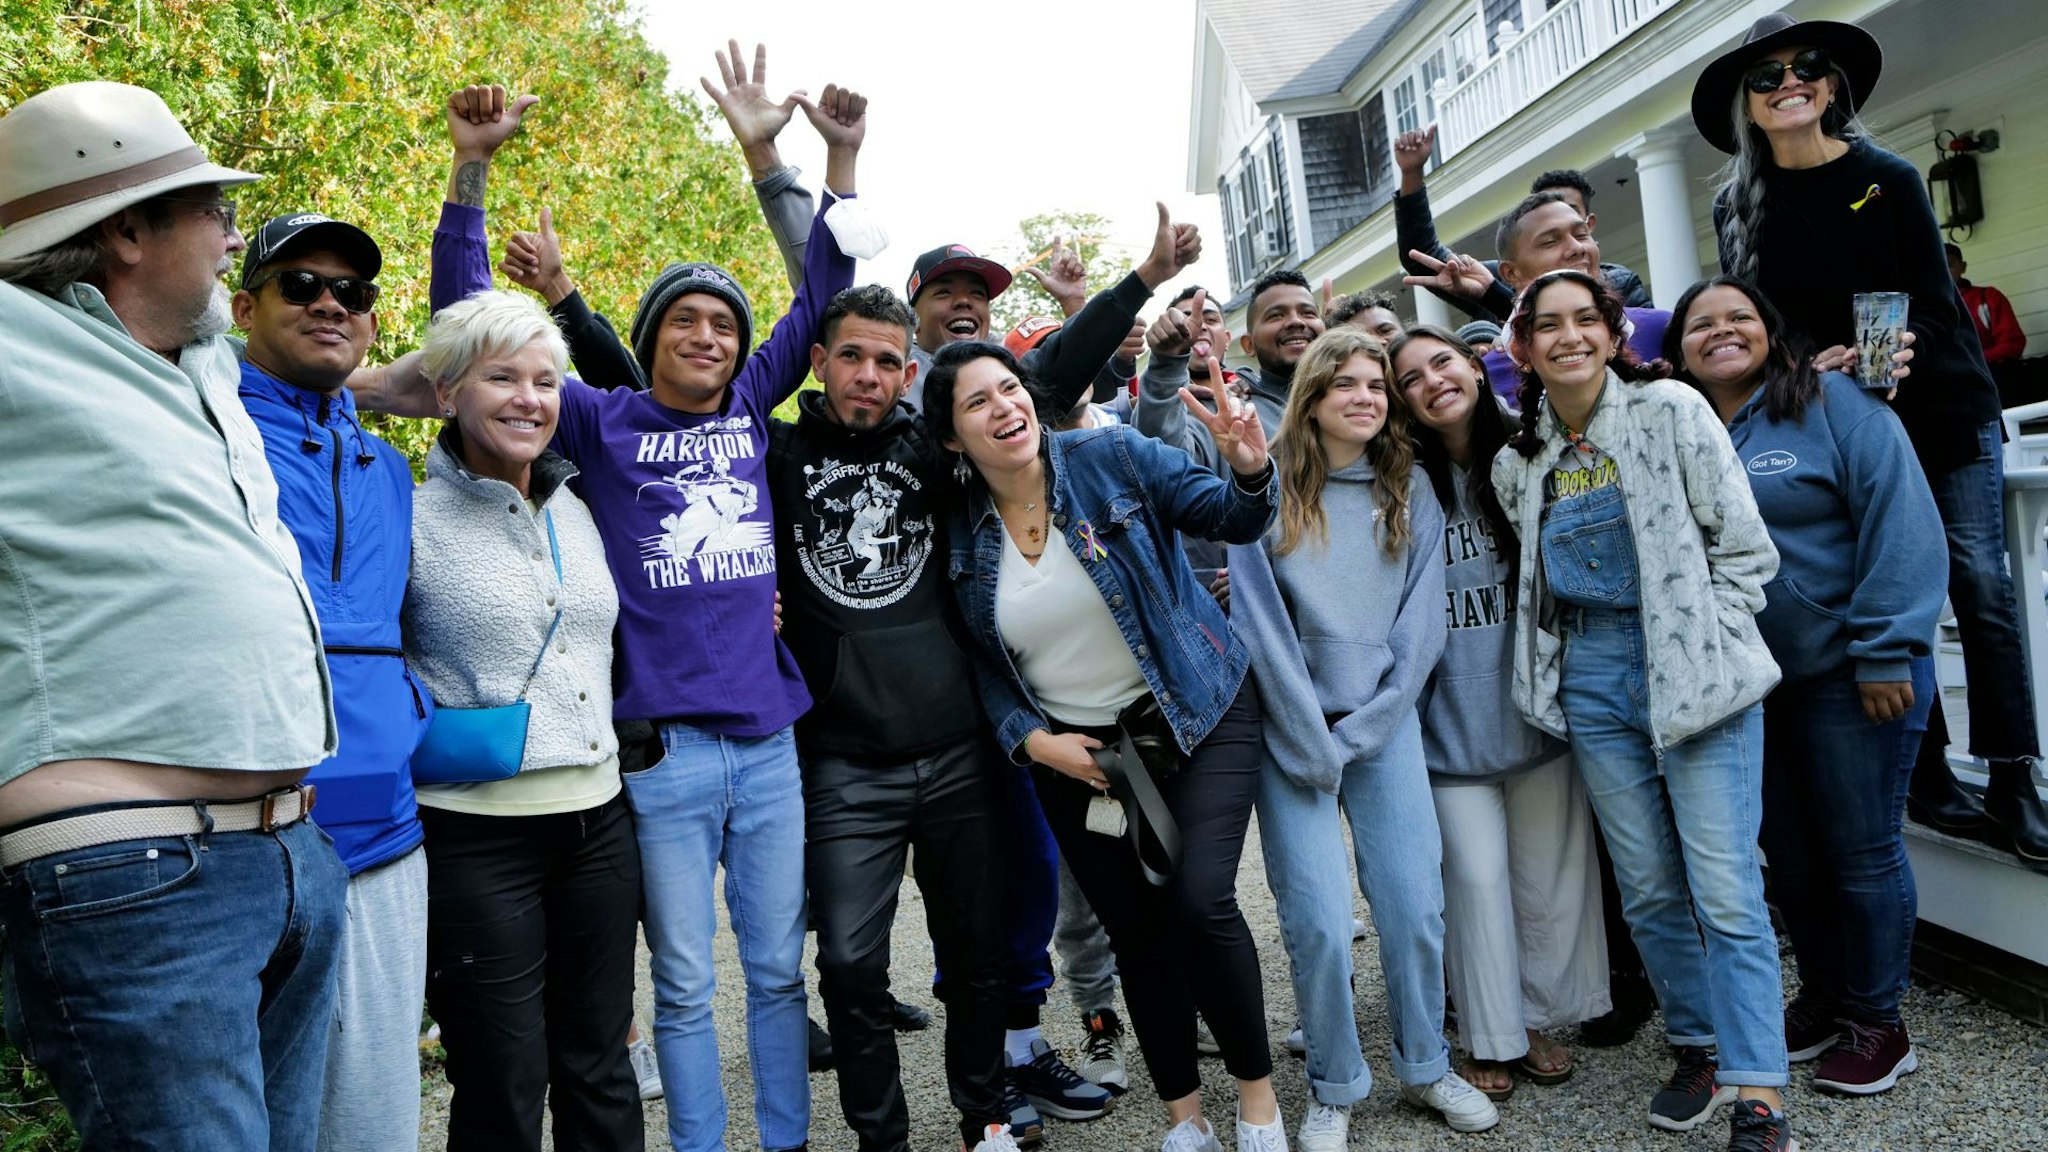 Martha's Vineyard, MA - September 16: Venezuelan migrants and volunteers celebrate together outside of St. Andrew's Parish House. Two planes of migrants from Venezuela arrived suddenly two days prior causing the local community to mobilize and create a makeshift shelter at the church.